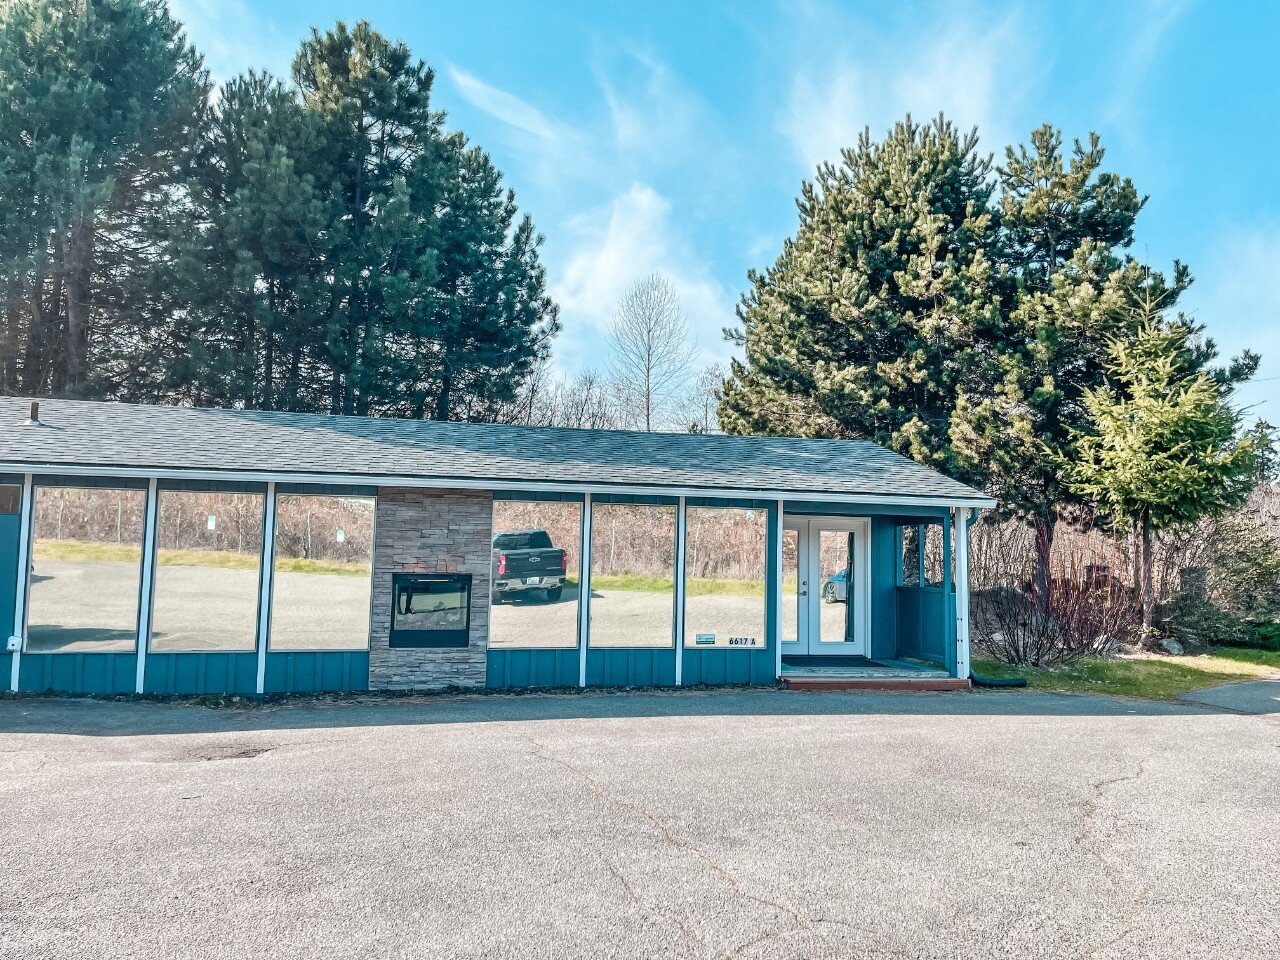 Say hello to the NEW Car Key Connect store located right here in Gig Harbor off of Wollochet .👋

We are so excited to finally announce the project we have been hard at work on over the last few months. 

📋Make an appointment and drop by to get your